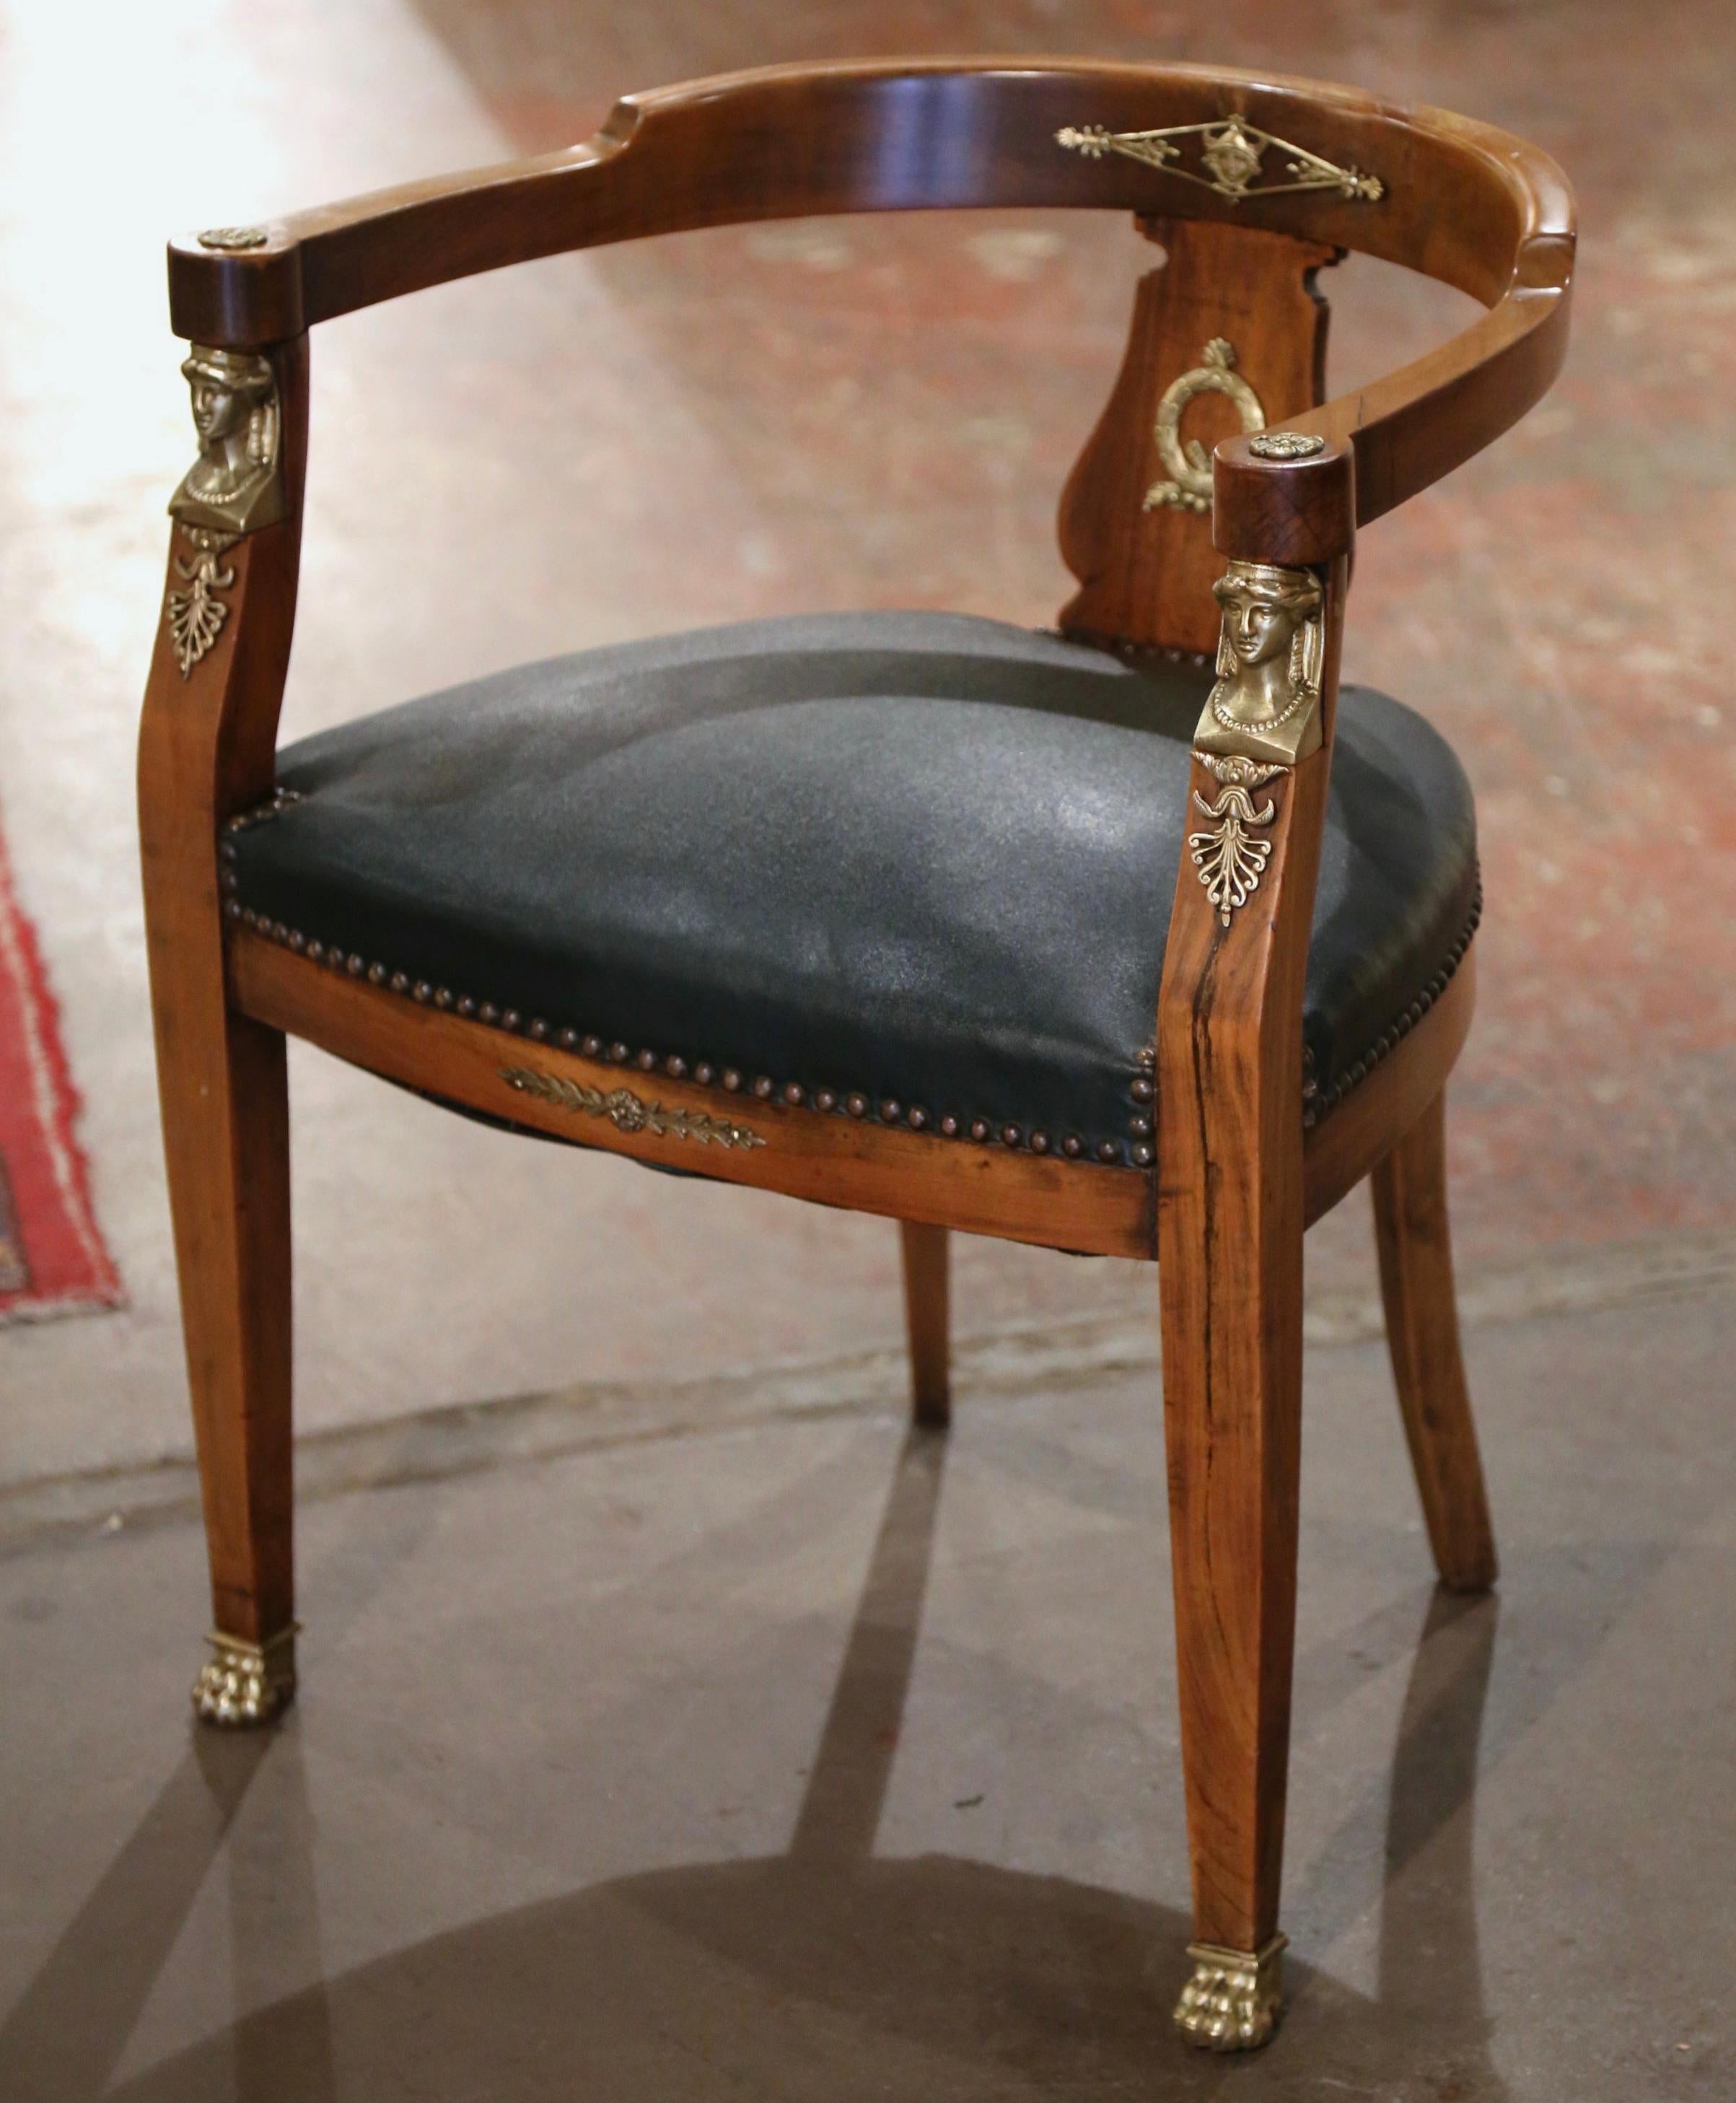 19th Century French Empire Cherry Wood Desk Barrel Armchair with Gilt Mounts For Sale 1